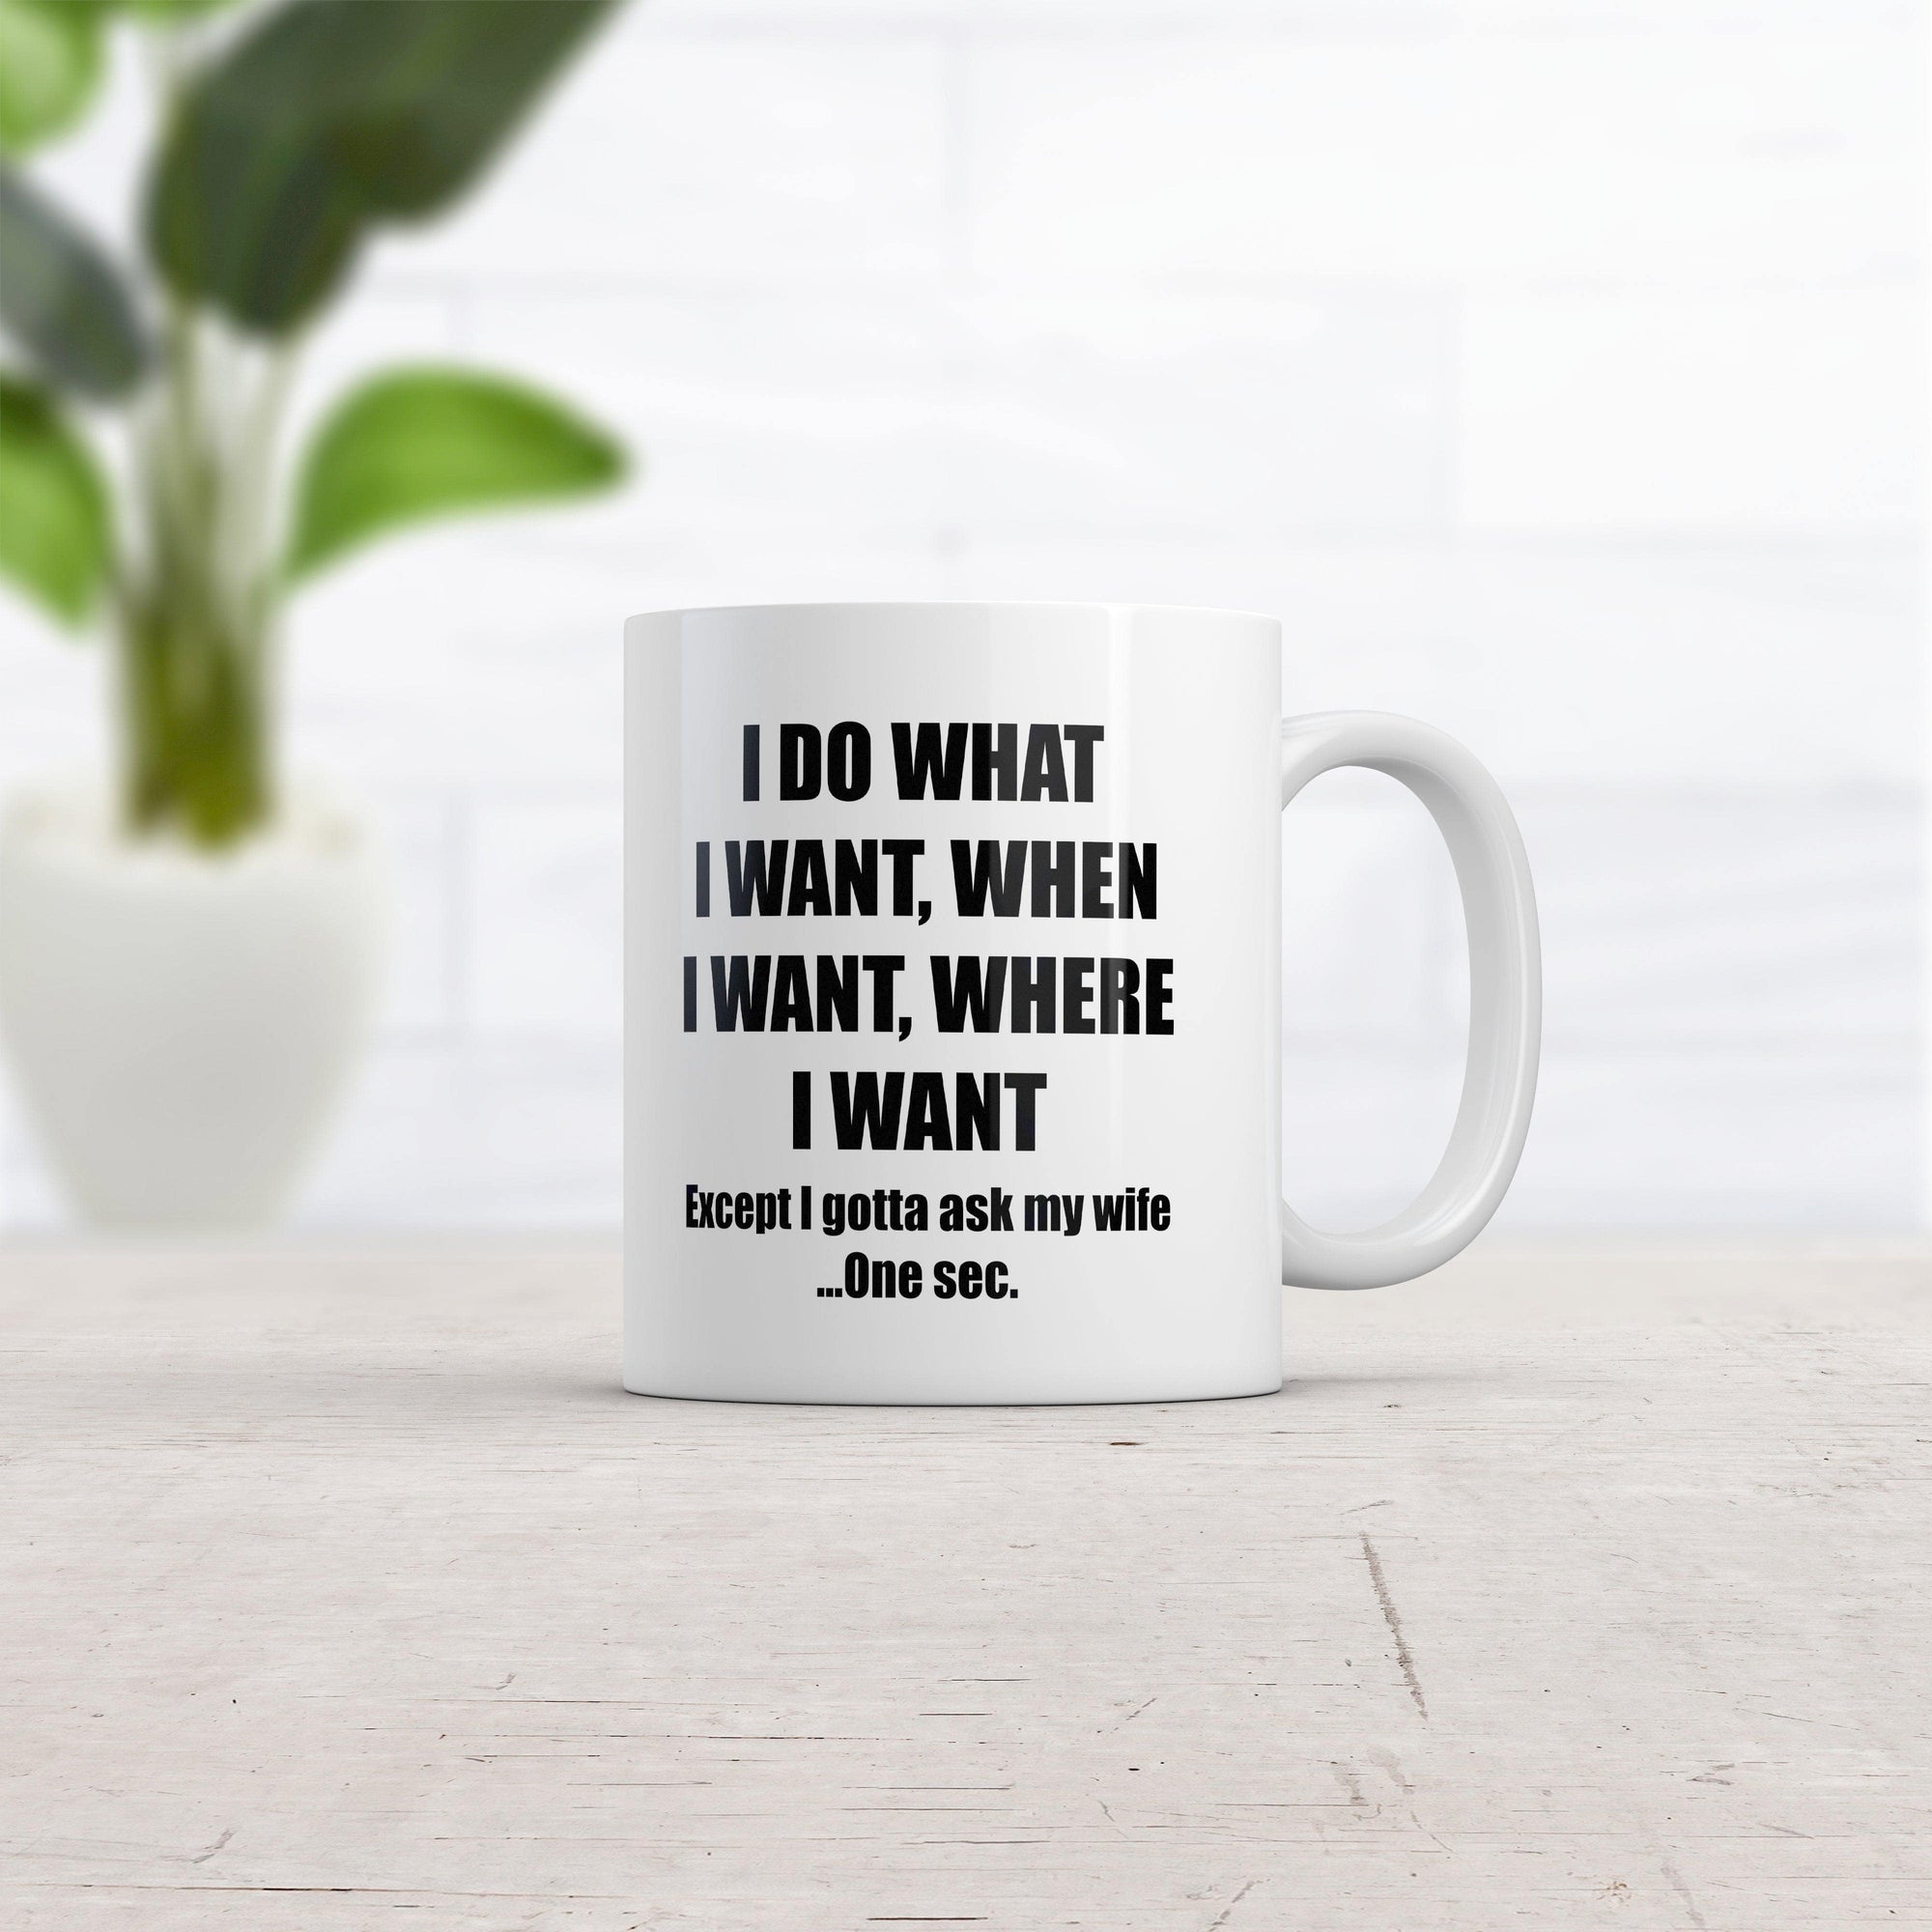 Do What I Want Gotta Ask My Wife Mug Funny Sarcastic Marriage Novelty Coffee Cup-11oz  -  Crazy Dog T-Shirts